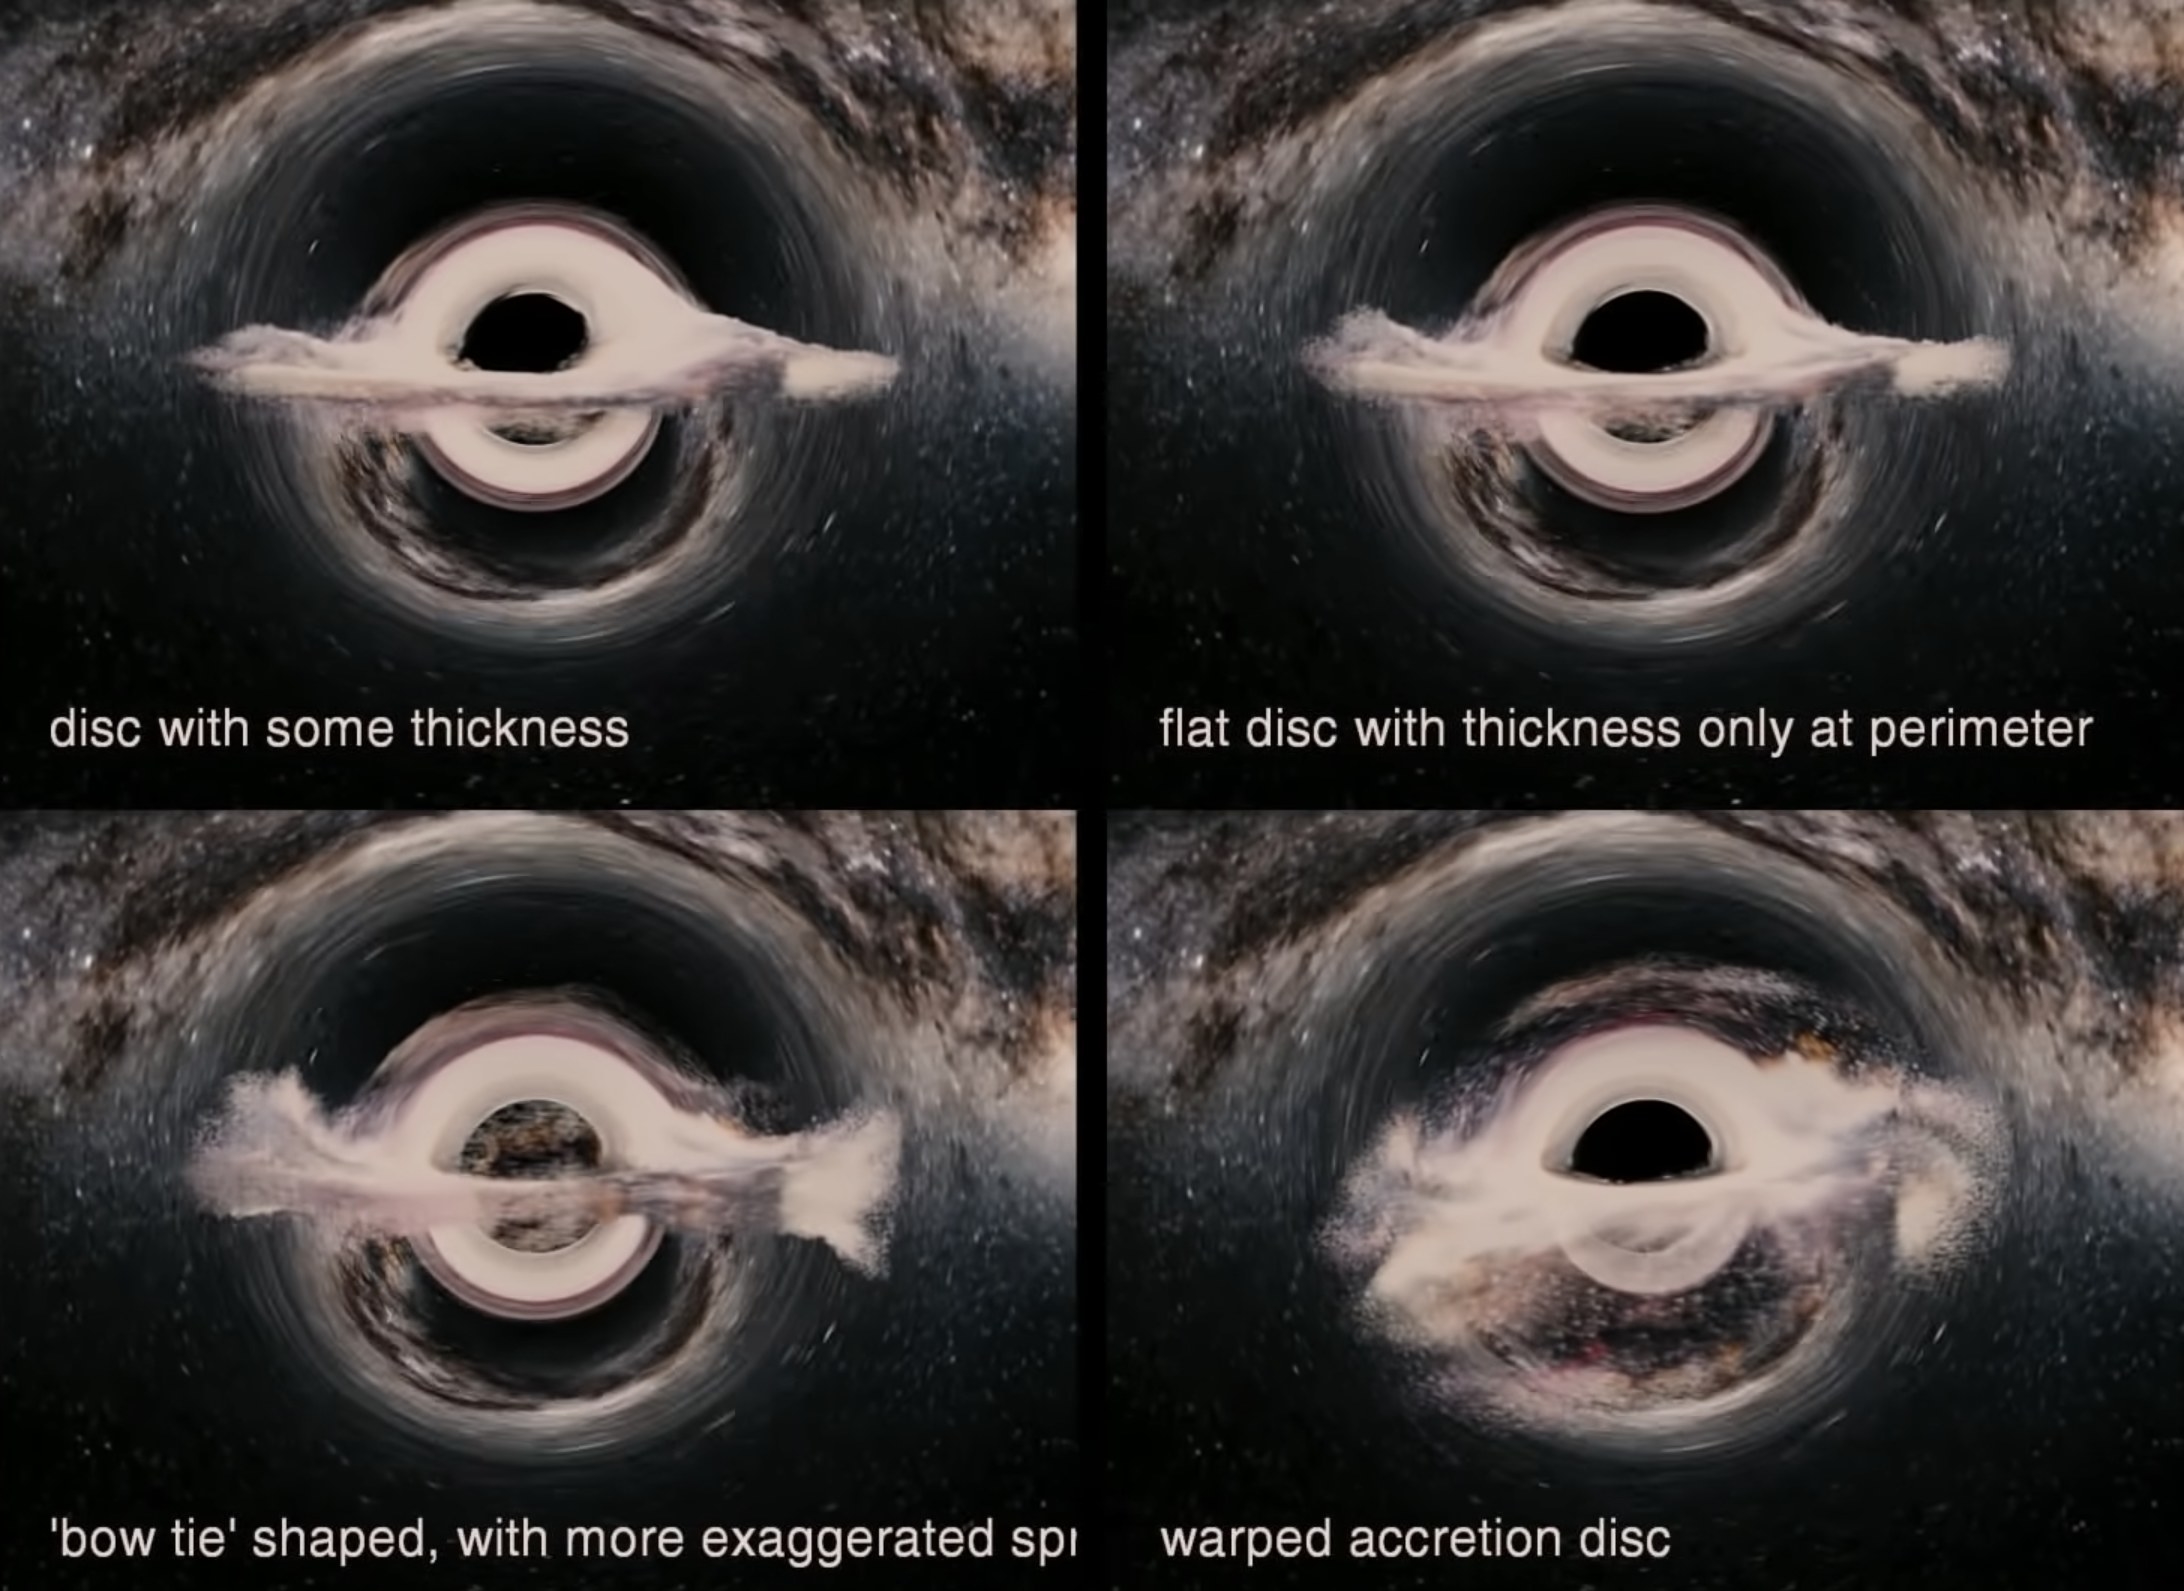 Several renderings of possible black hole shapes